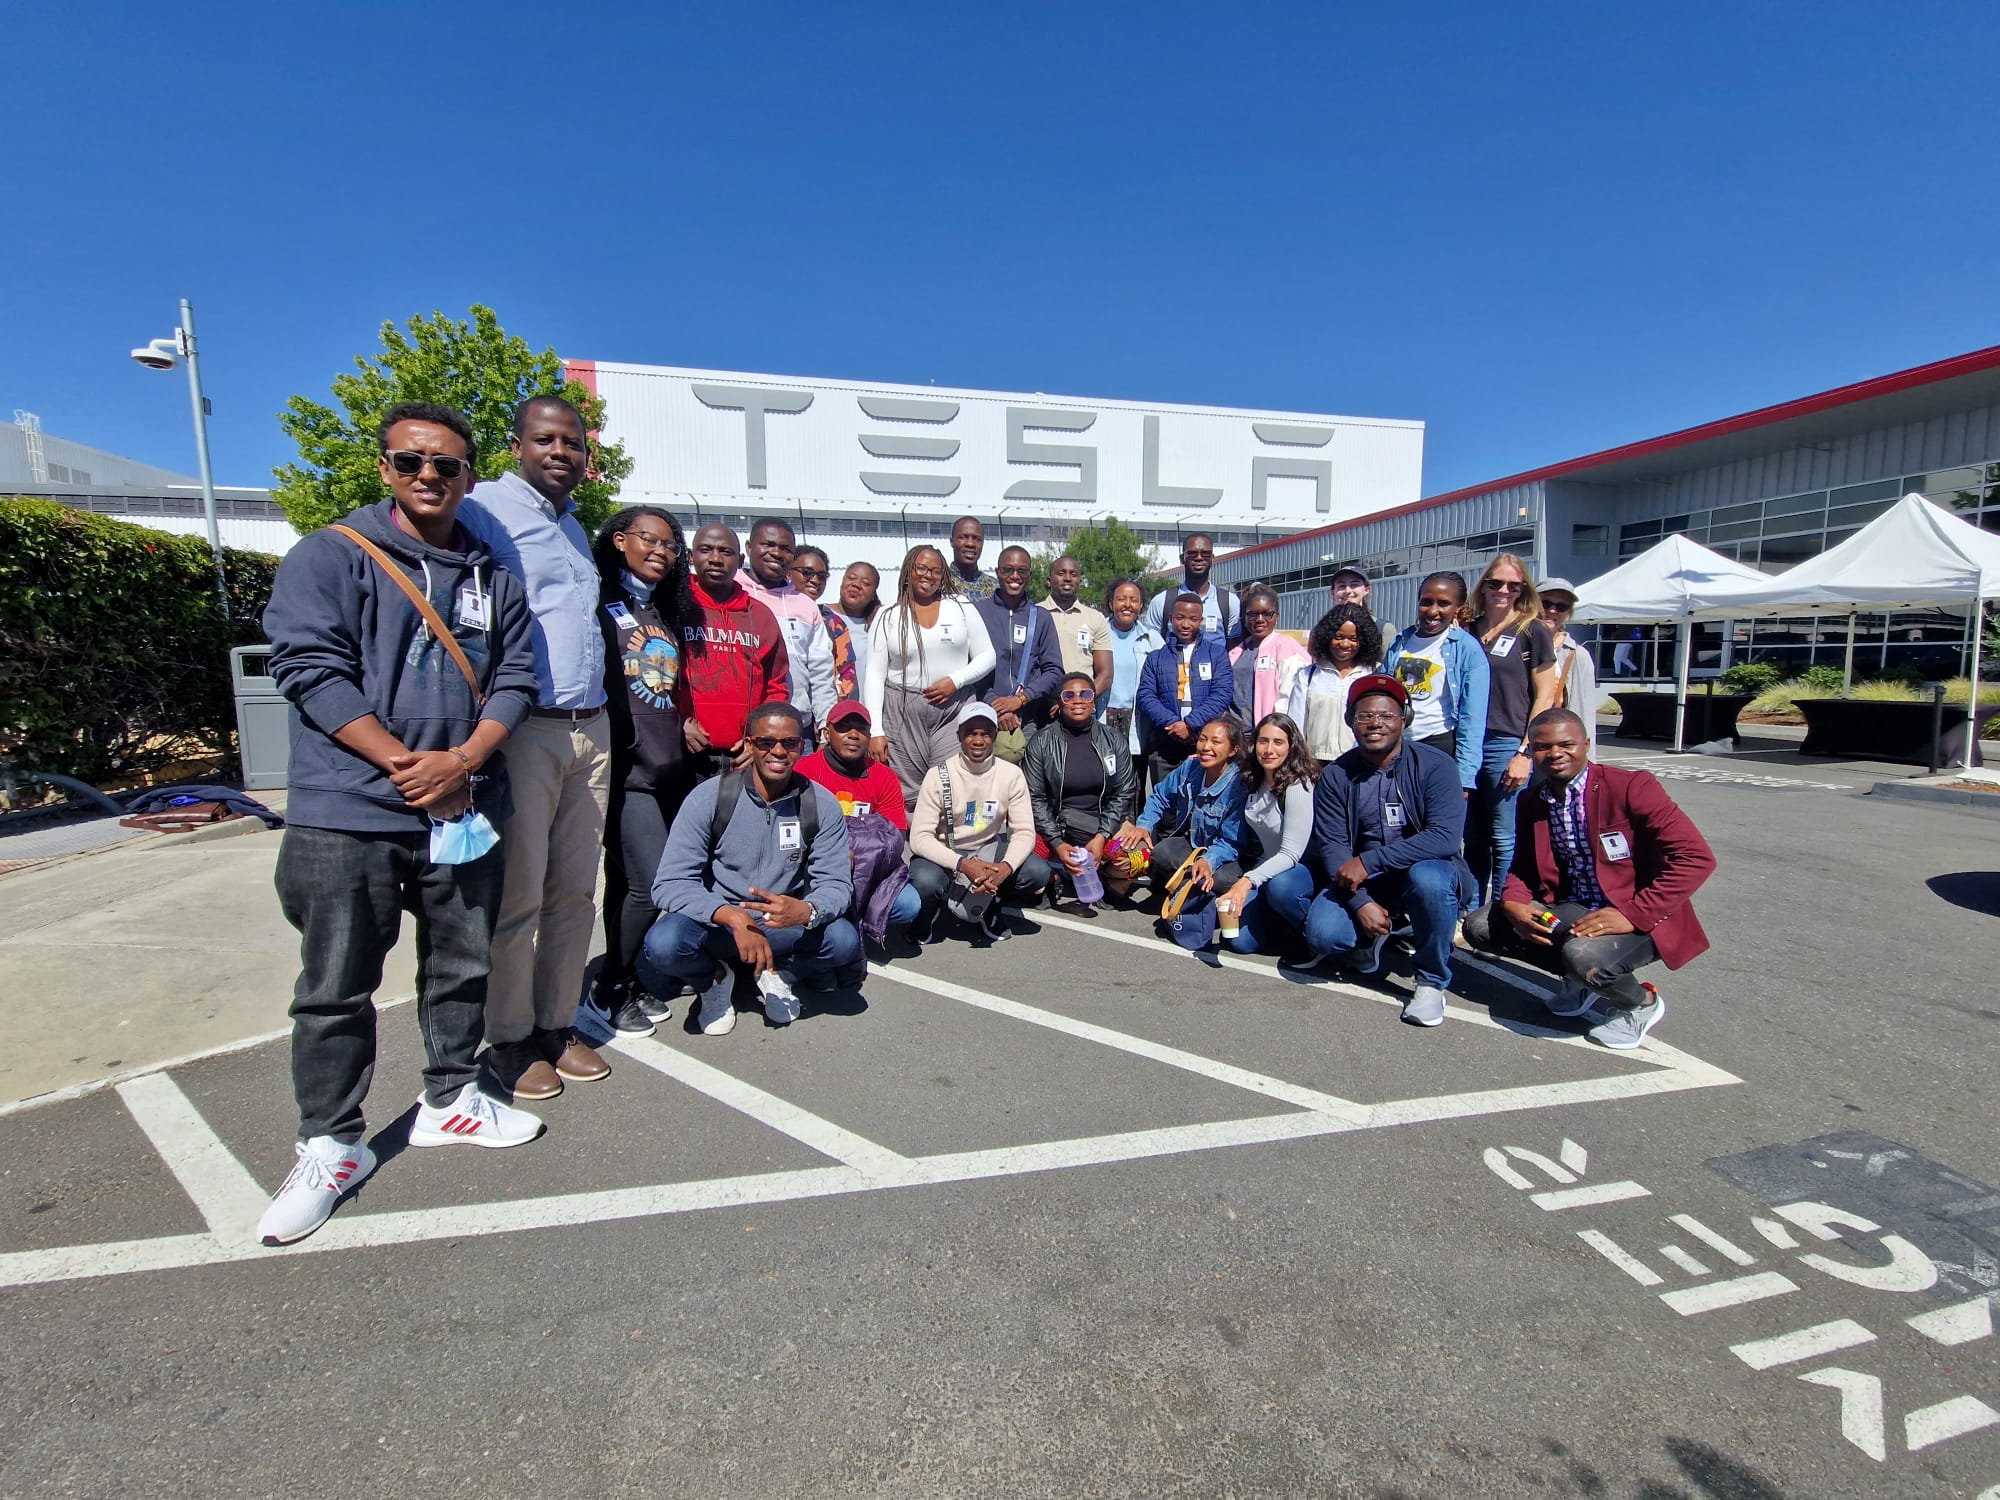 The Fellows smile for a group photo outside the Tesla Fremont Factory.